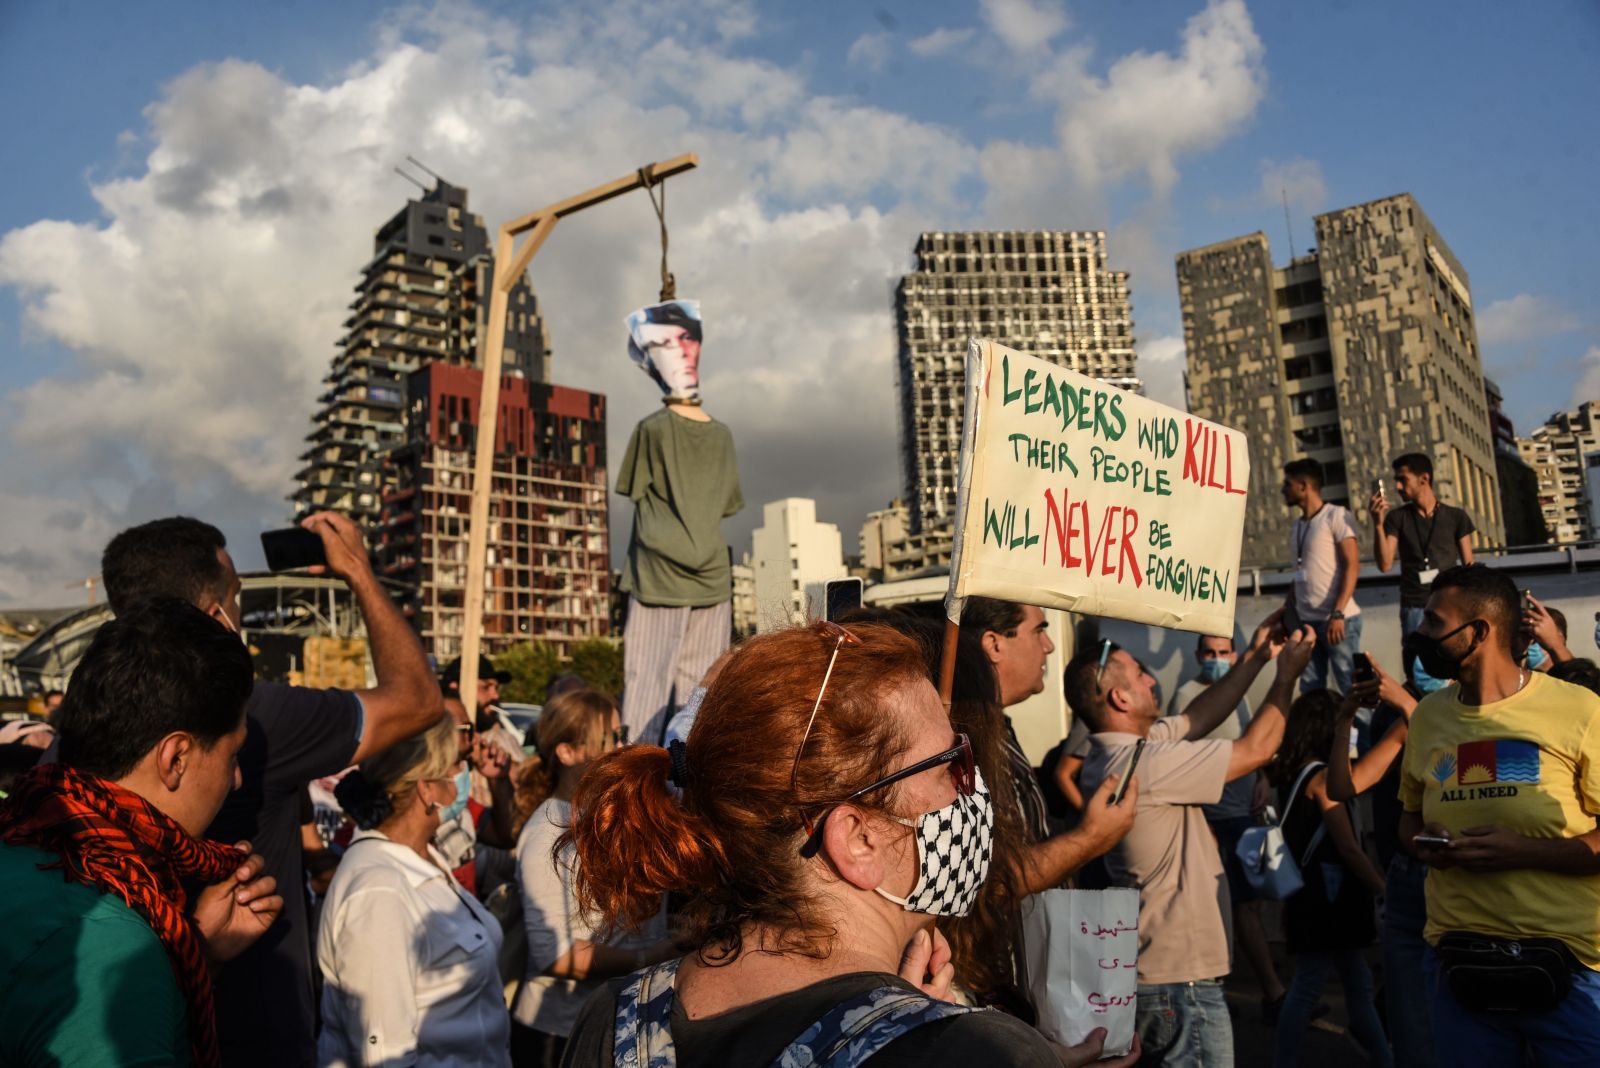 Since the 4th August explosion, protesters in Beirut want vengeance.